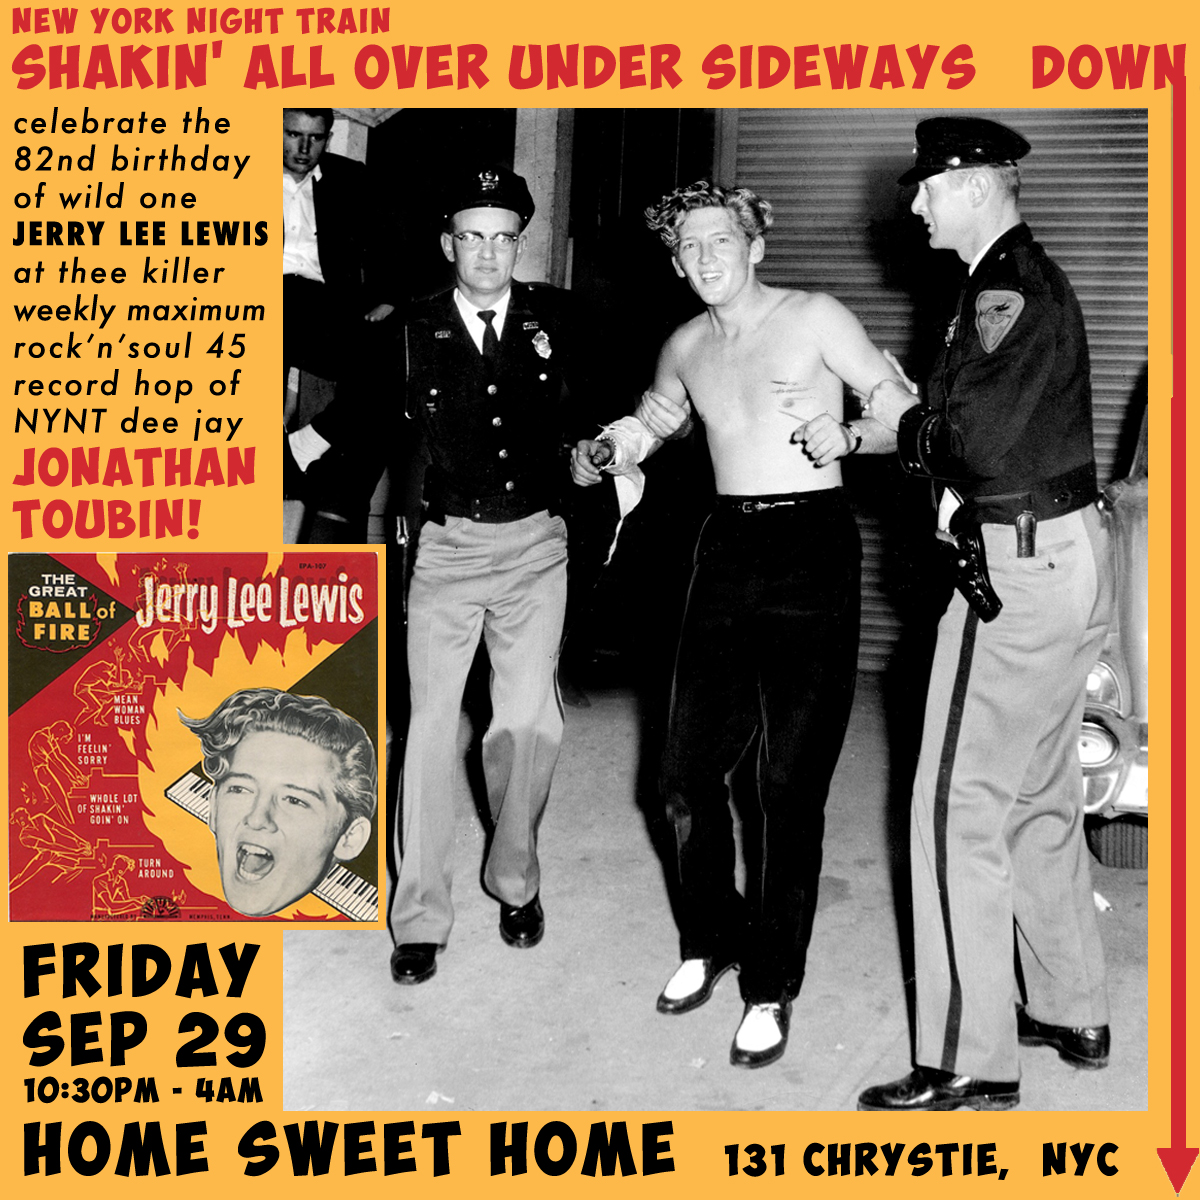 NEW YORK NIGHT TRAIN » Blog Archive » VOTE SOLAR, NY DOLLS SALLY CAN'T  DANCE, JERRY LEE B-DAY SHAKIN', and MIDNIGHT RAMBLER DALLAS SOUL CLAP